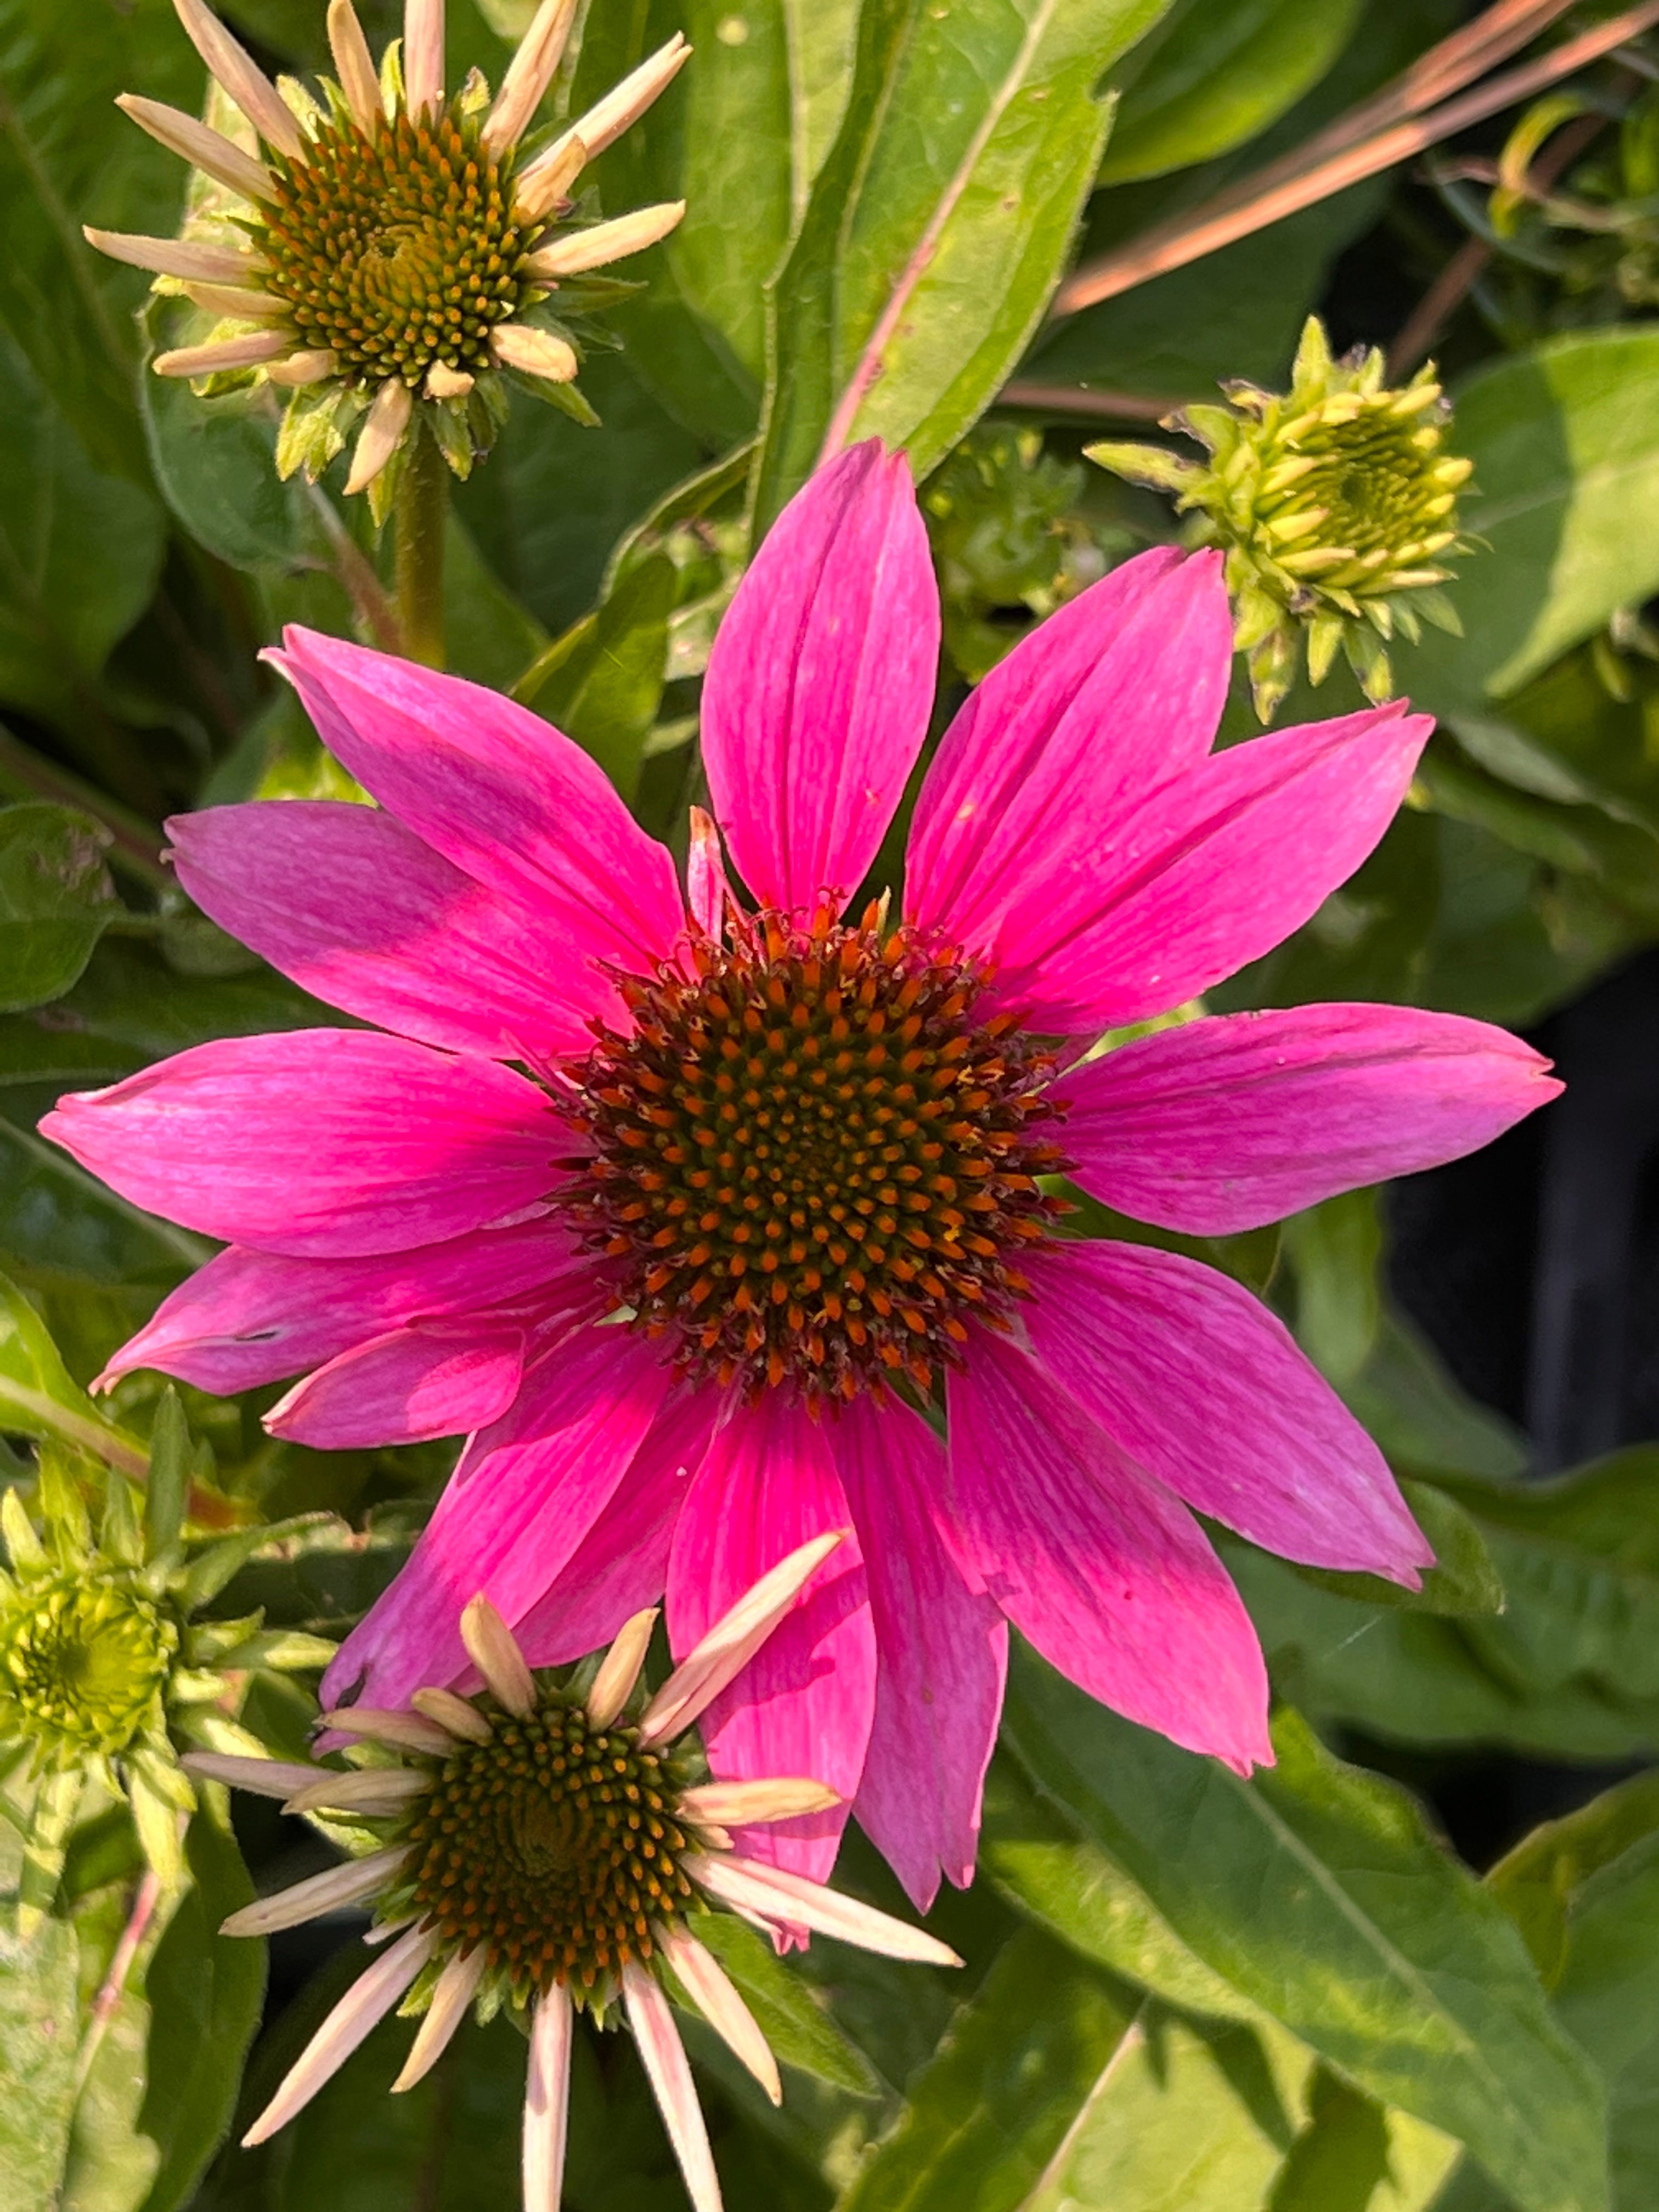 Echinacea Purpurea 'Pow Wow Wild Berry' Coneflower Online on Sale from HnG Nursery for trees & plants